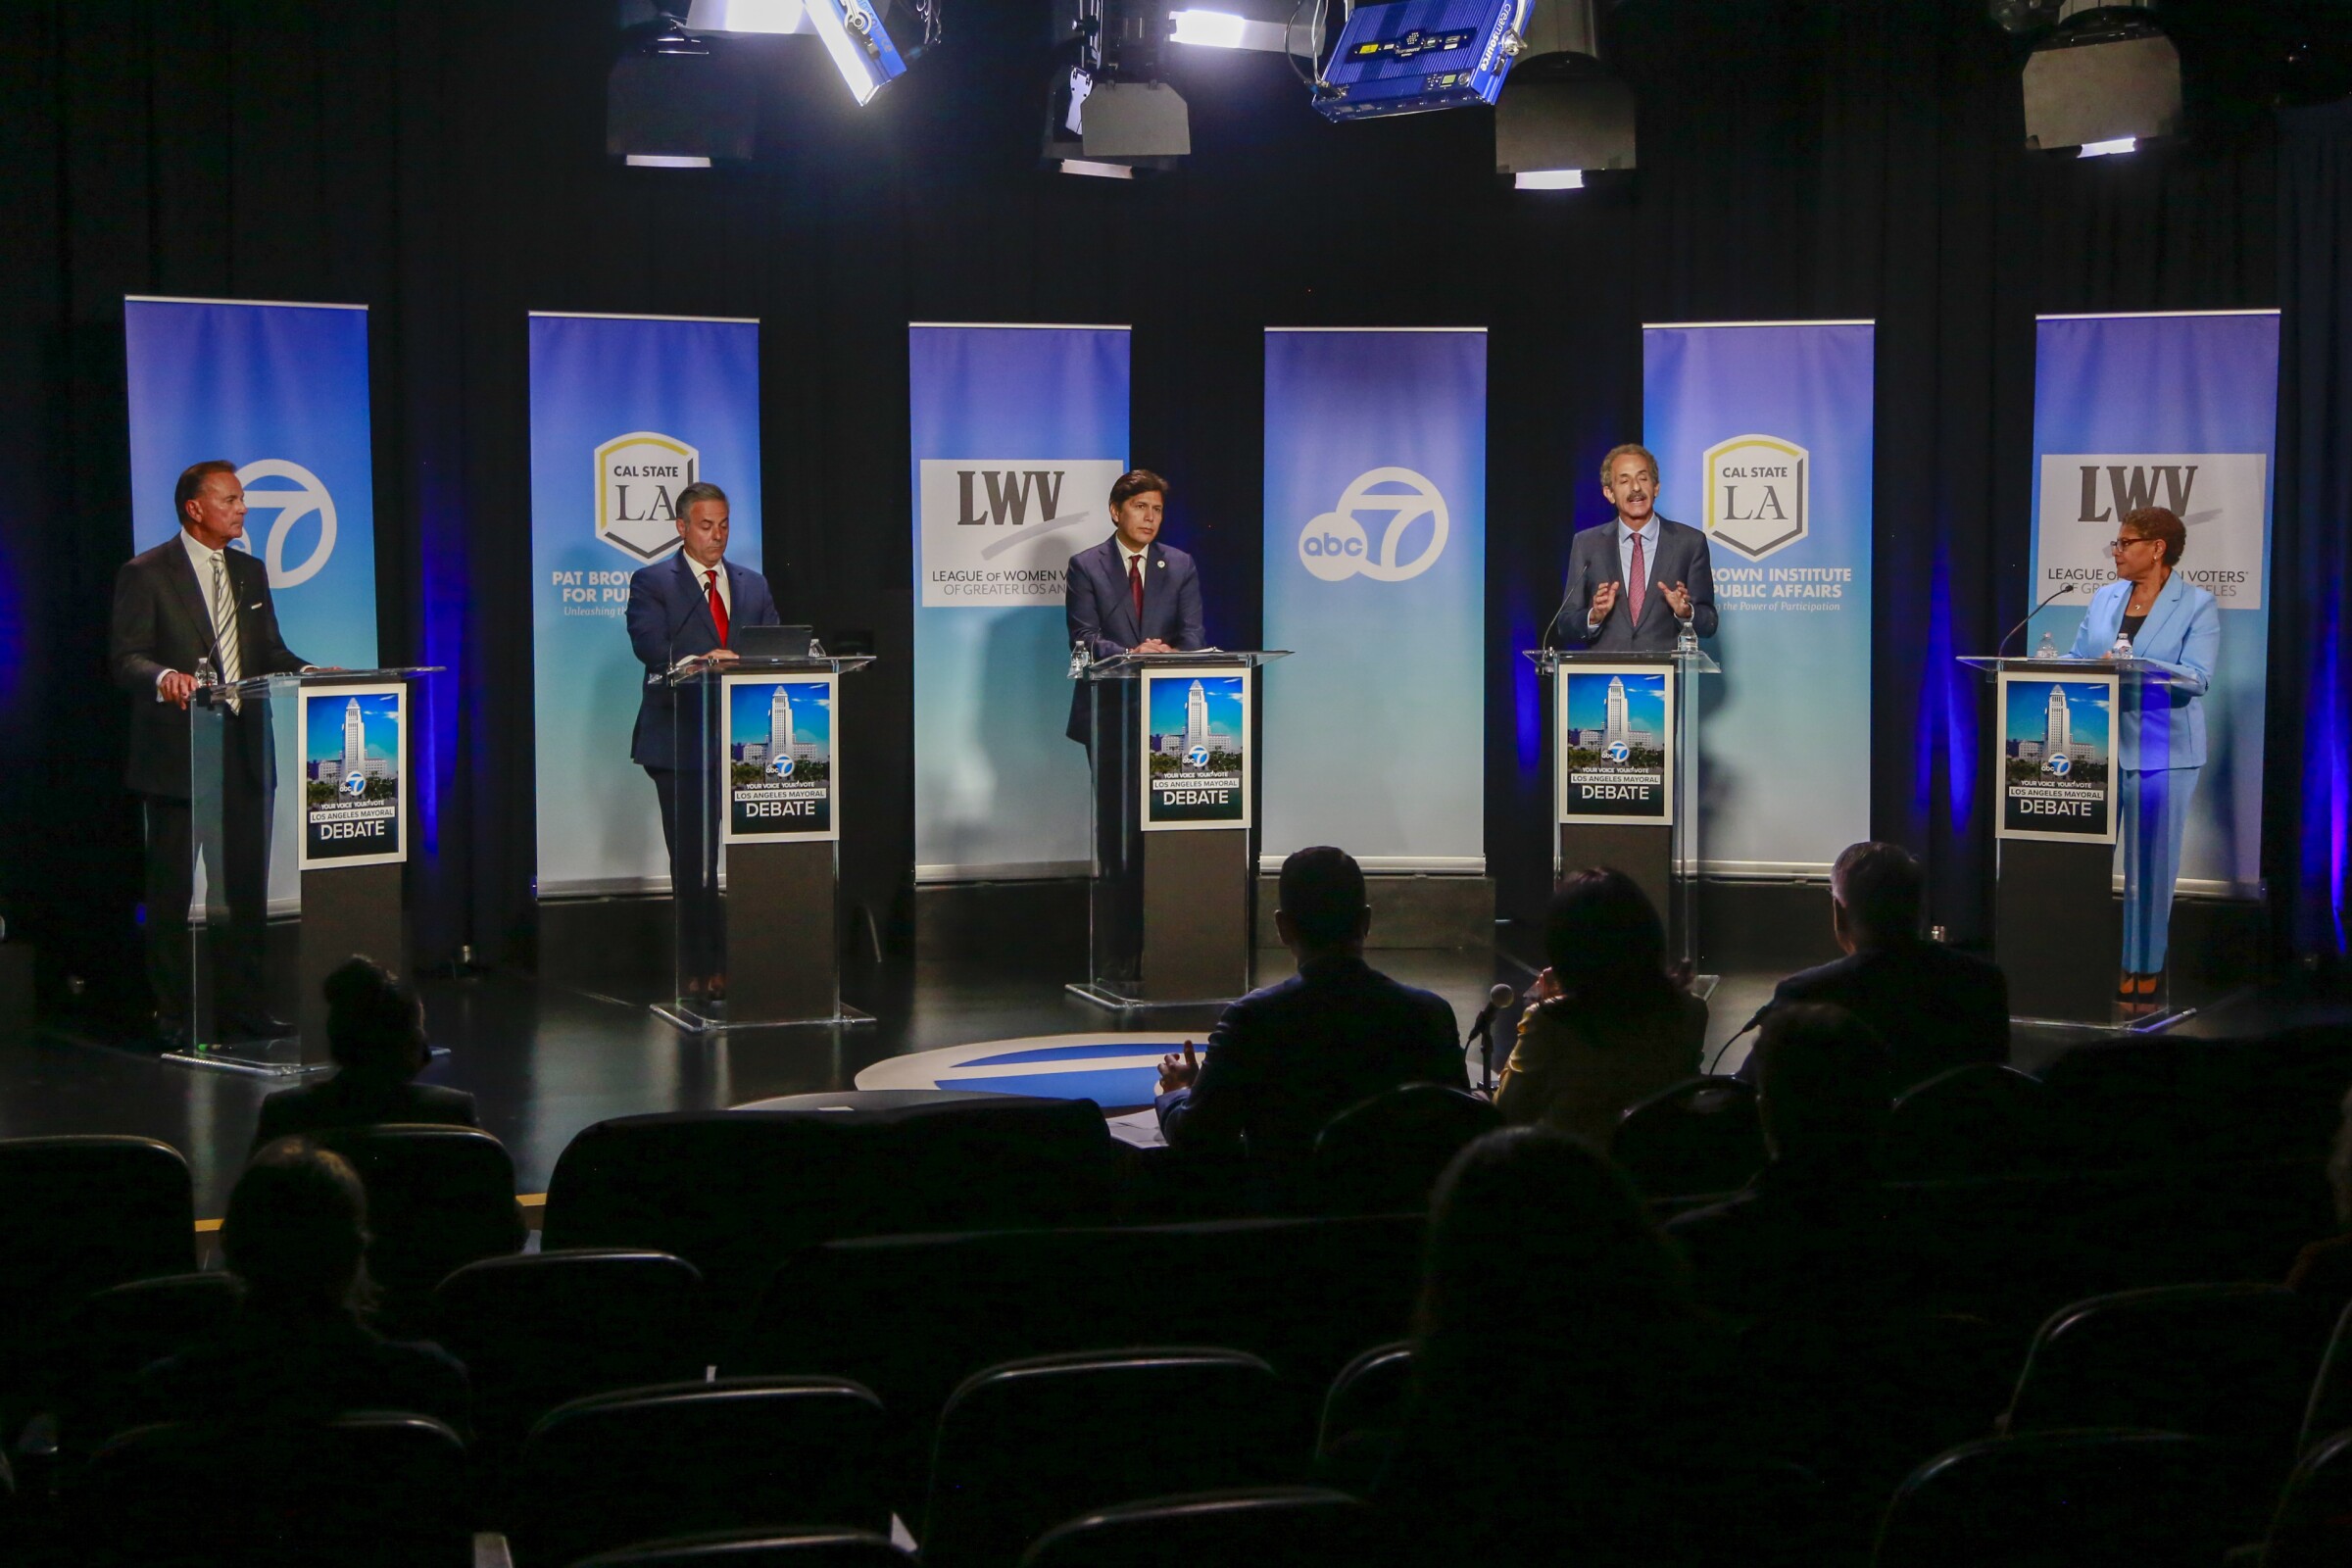 Six mayoral candidates, each standing behind a lectern, participate in a debate at Cal State L.A. 